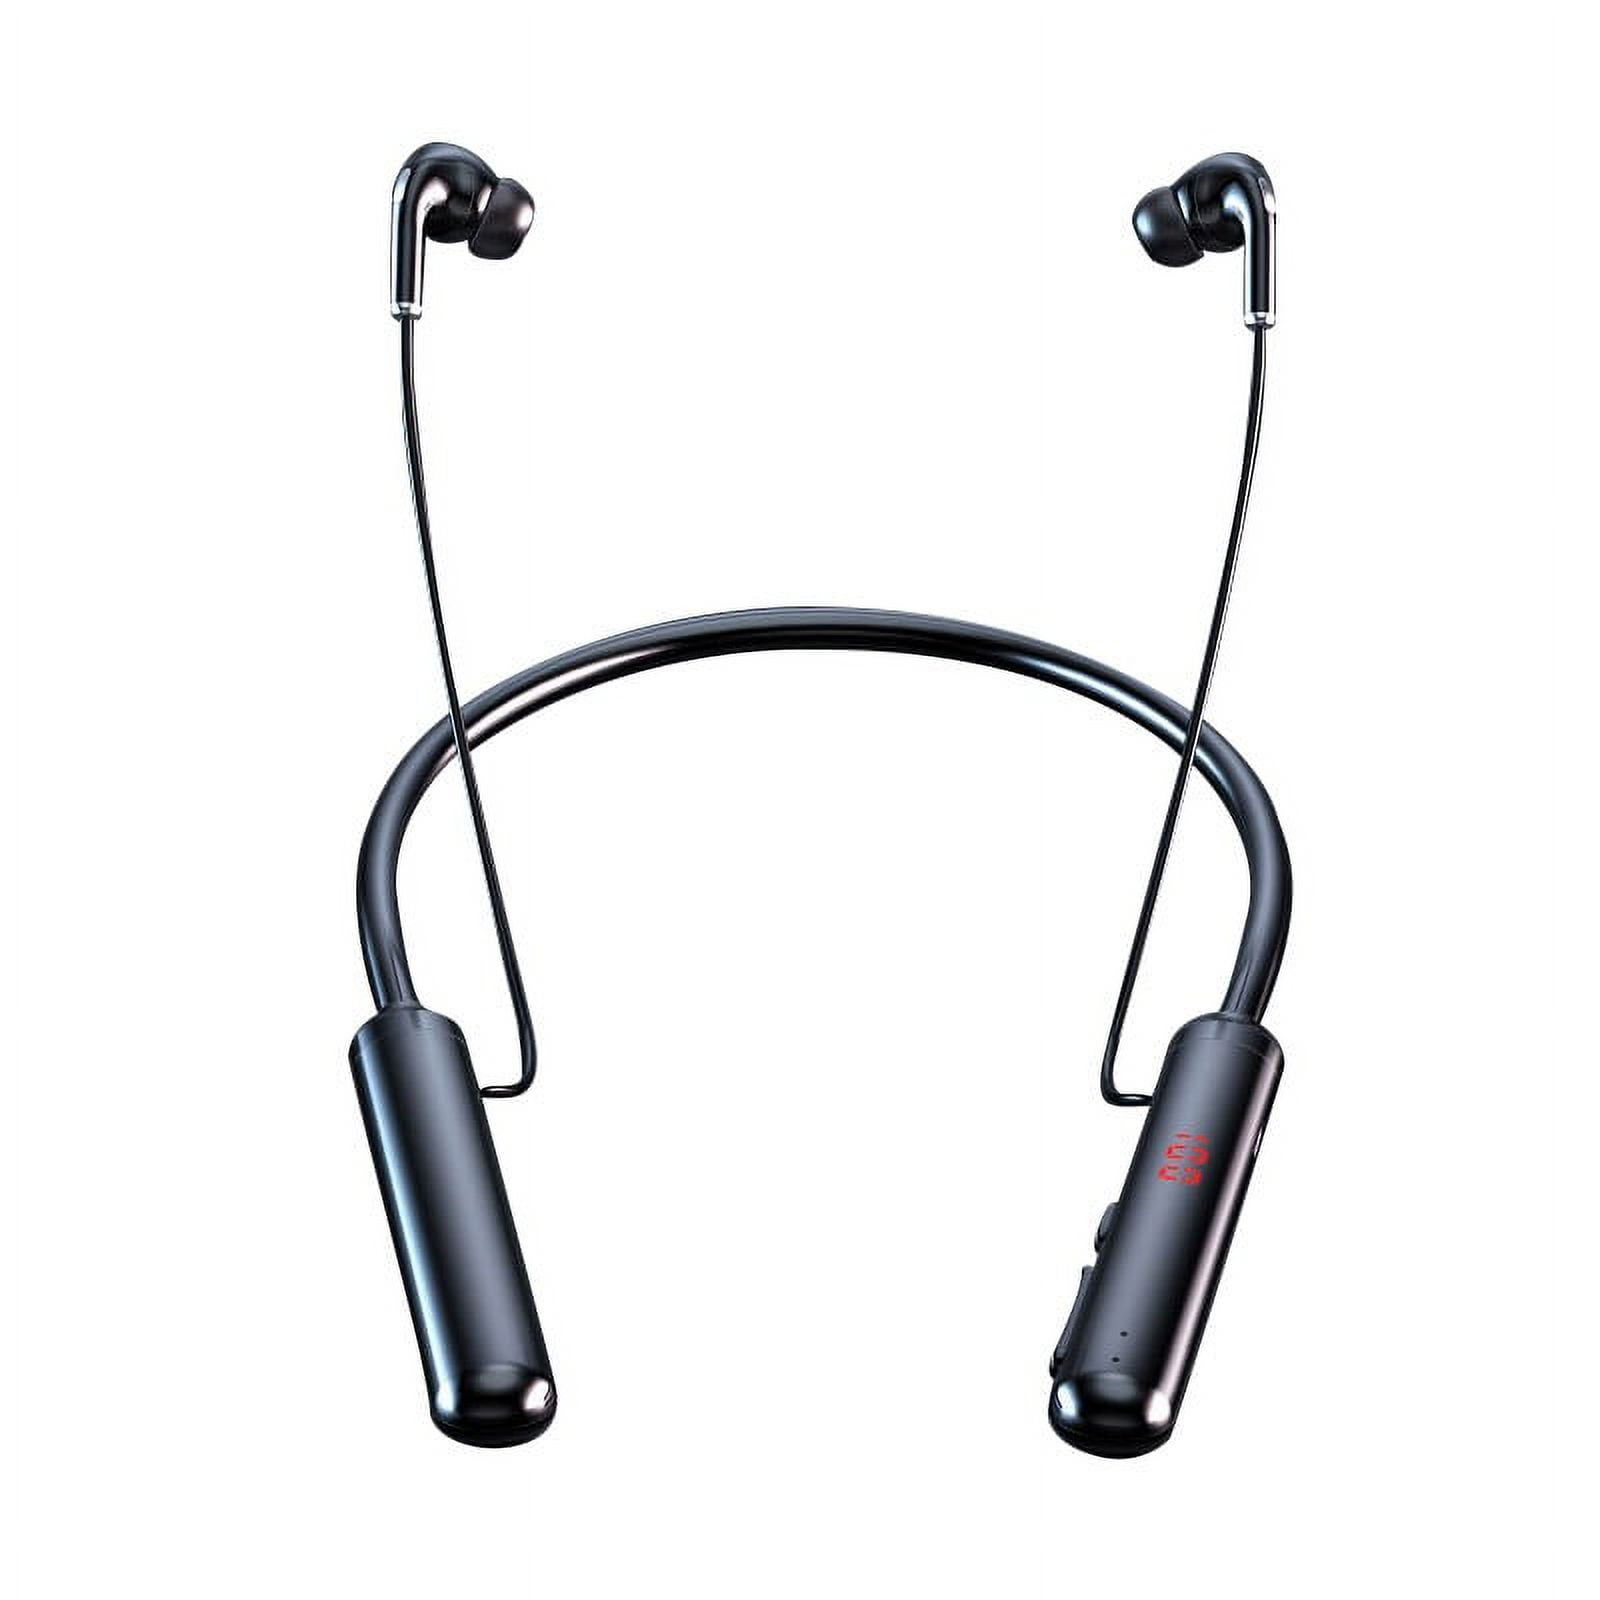  Sony WH-CH520 Compact Easy Carrying Wireless Bluetooth On-Ear  Headphones (Black) Bundle with Knox Gear Metal Headphone Stand (2 Items) :  Electronics